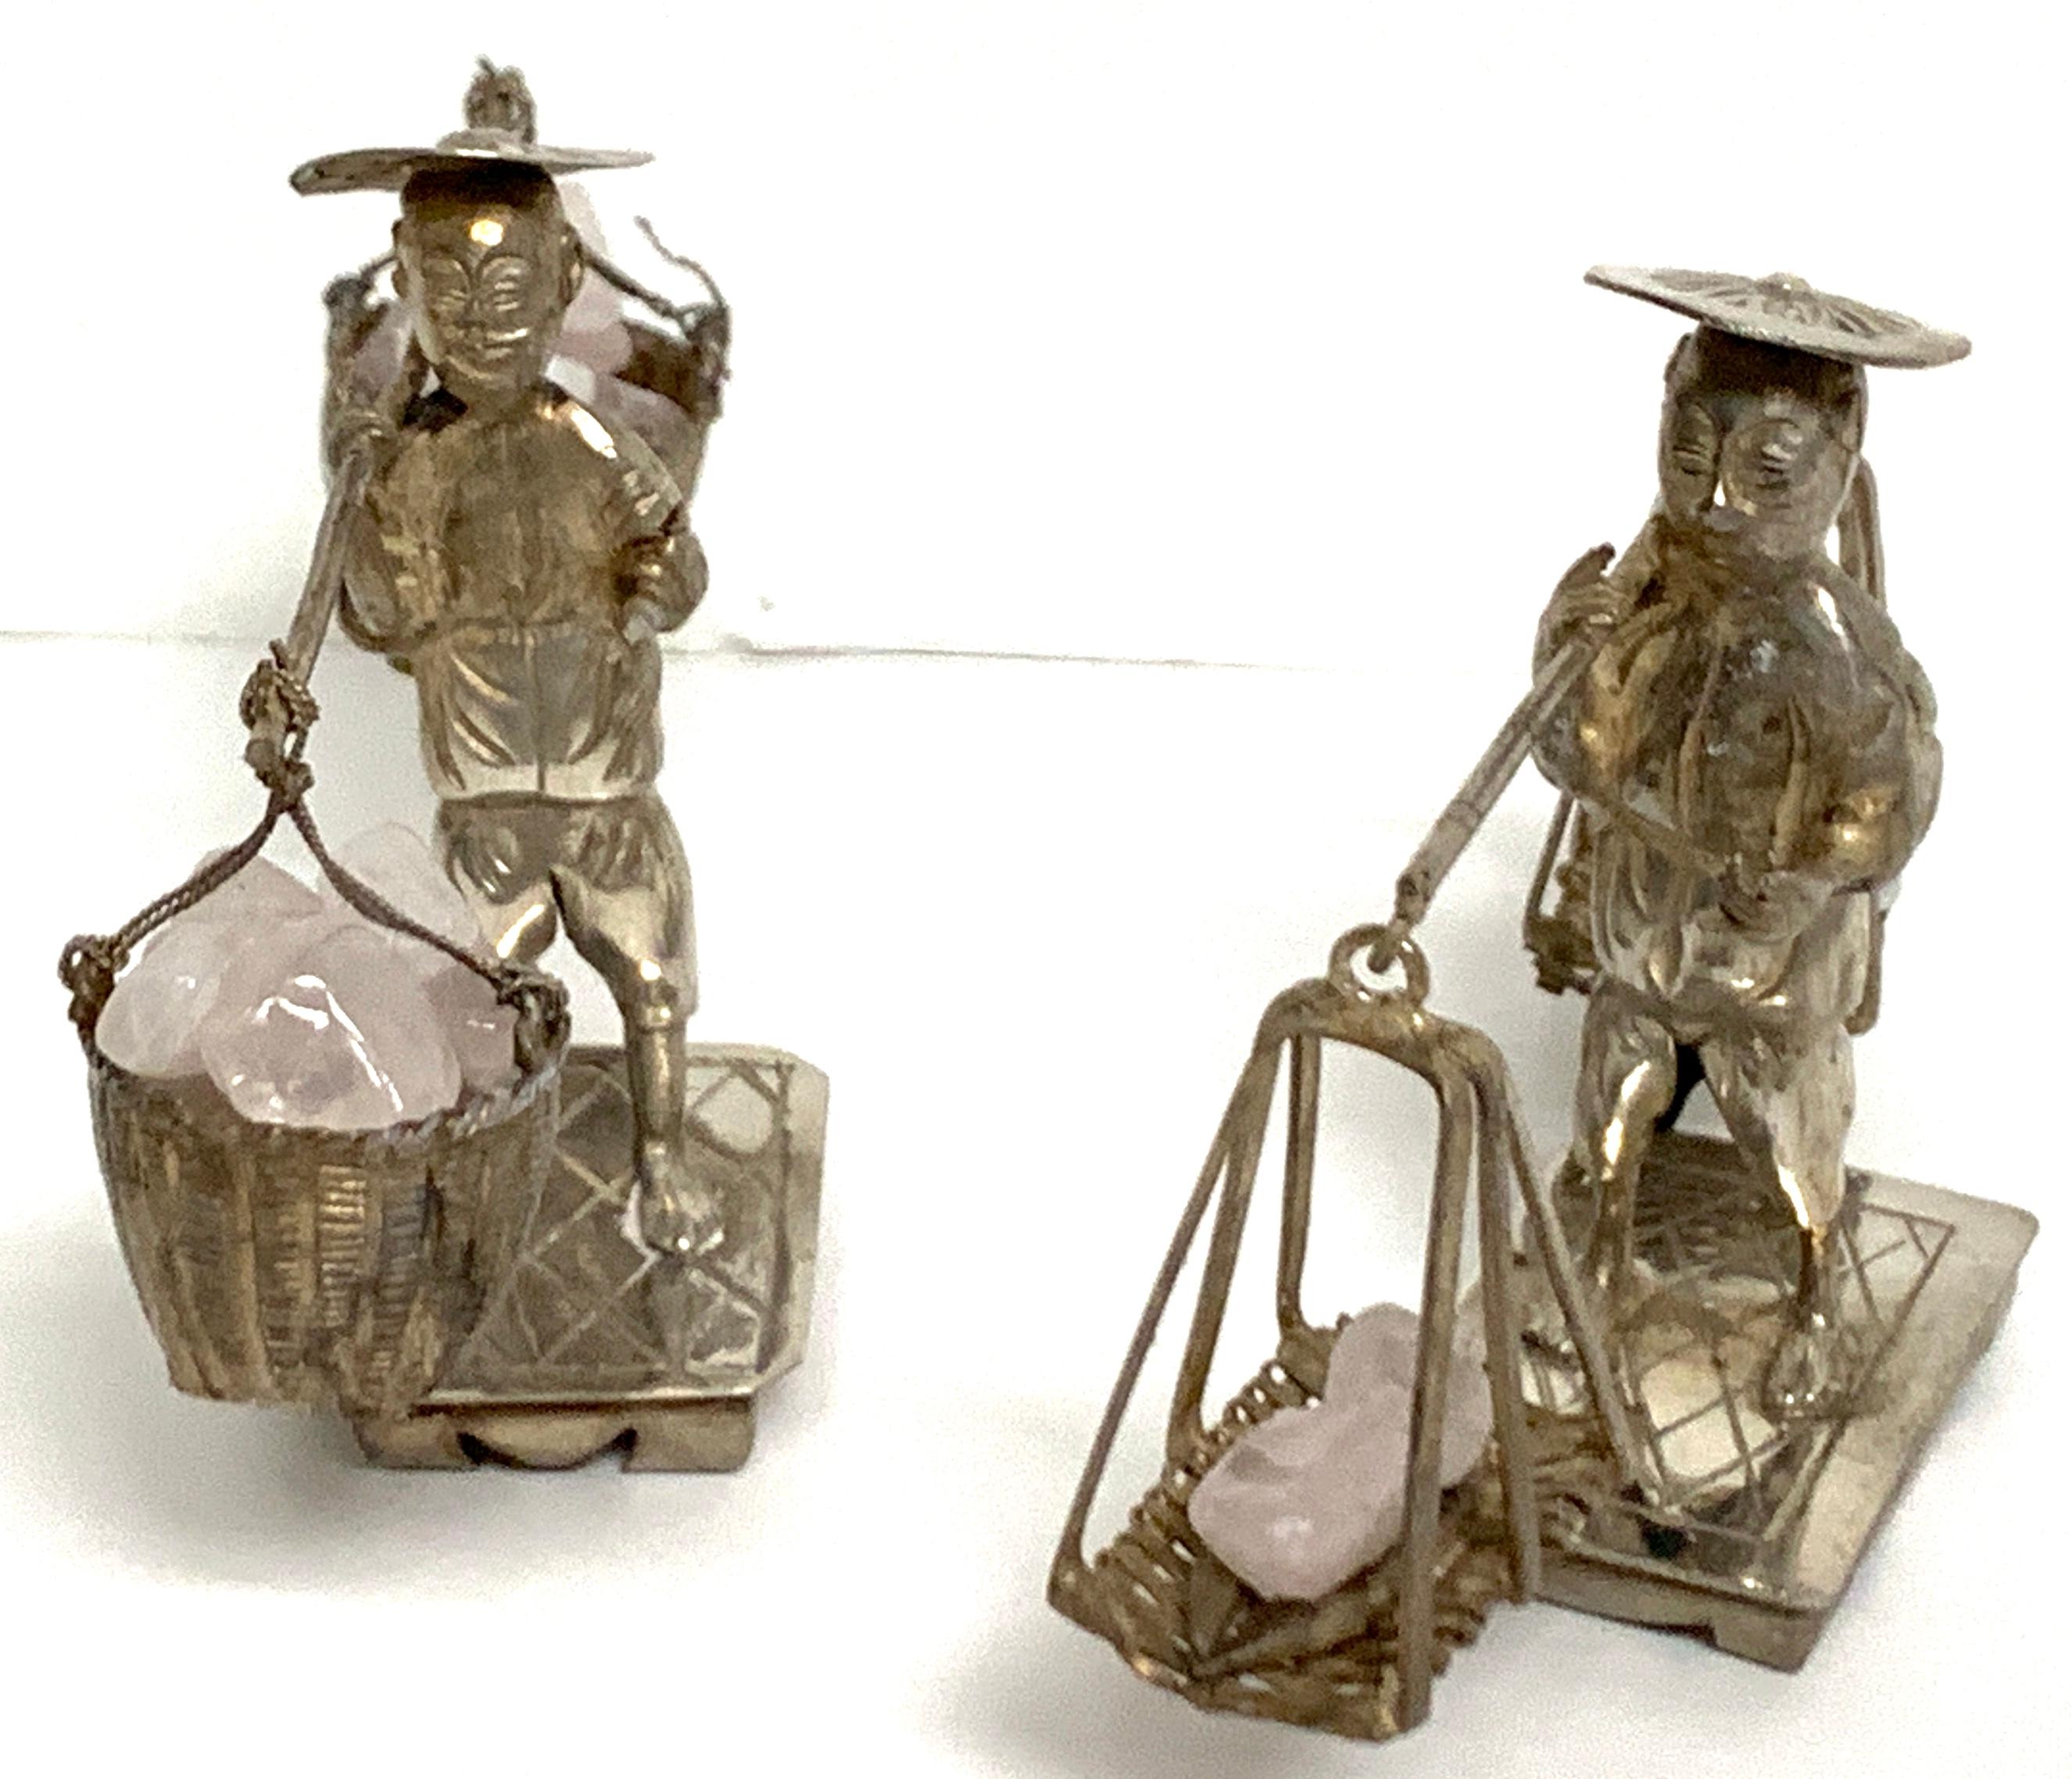 Pair of Chinese Export sterling figures of labourers carrying rose quartz
Each one detailed and realistically cast, both in traditional dress with carrying pole with hanging baskets of polished rose quartz. One is unmarked, one is hallmarked with 85